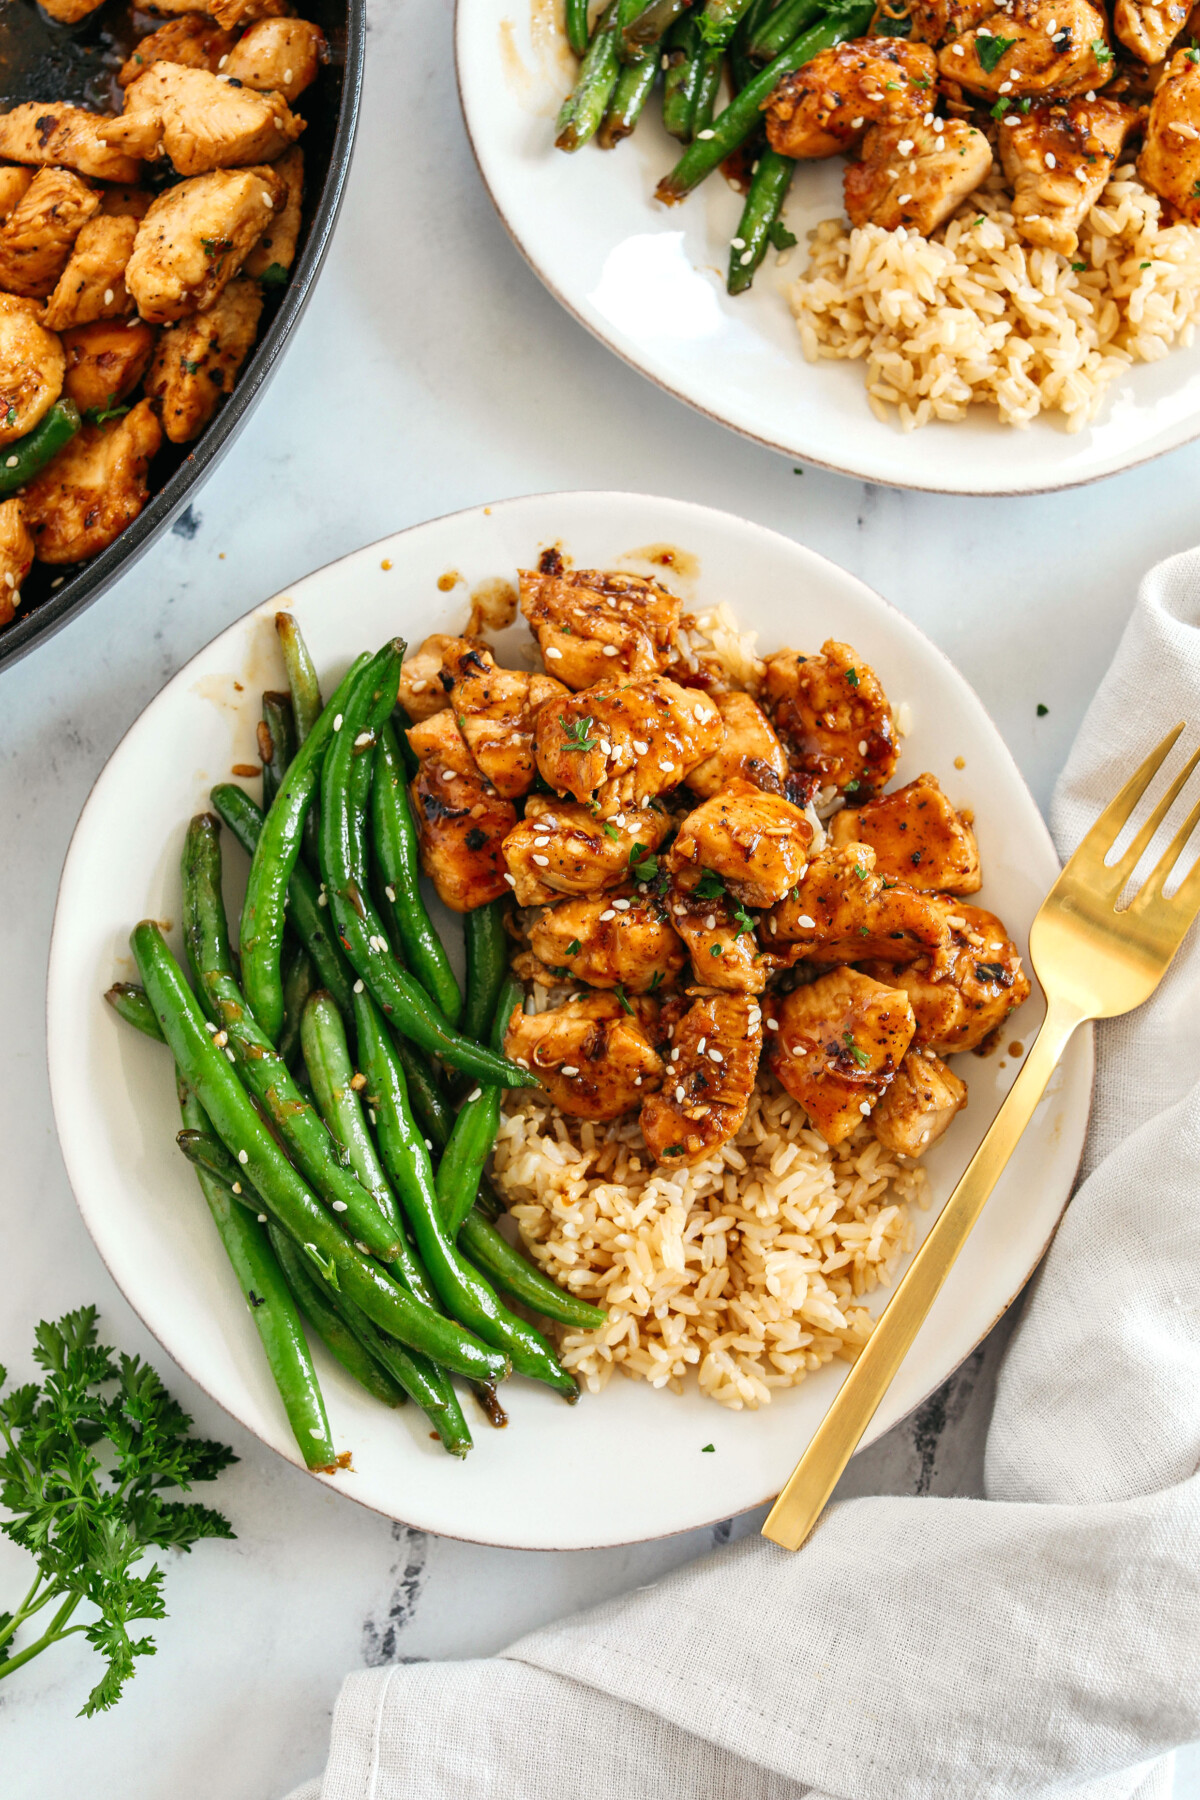 Super flavorful Honey Garlic Chicken and Green Beans make the perfect weeknight meal smothered in a delicious sauce that tastes way better than take-out!  Serve over rice and have dinner on your table in under 30 minutes! 